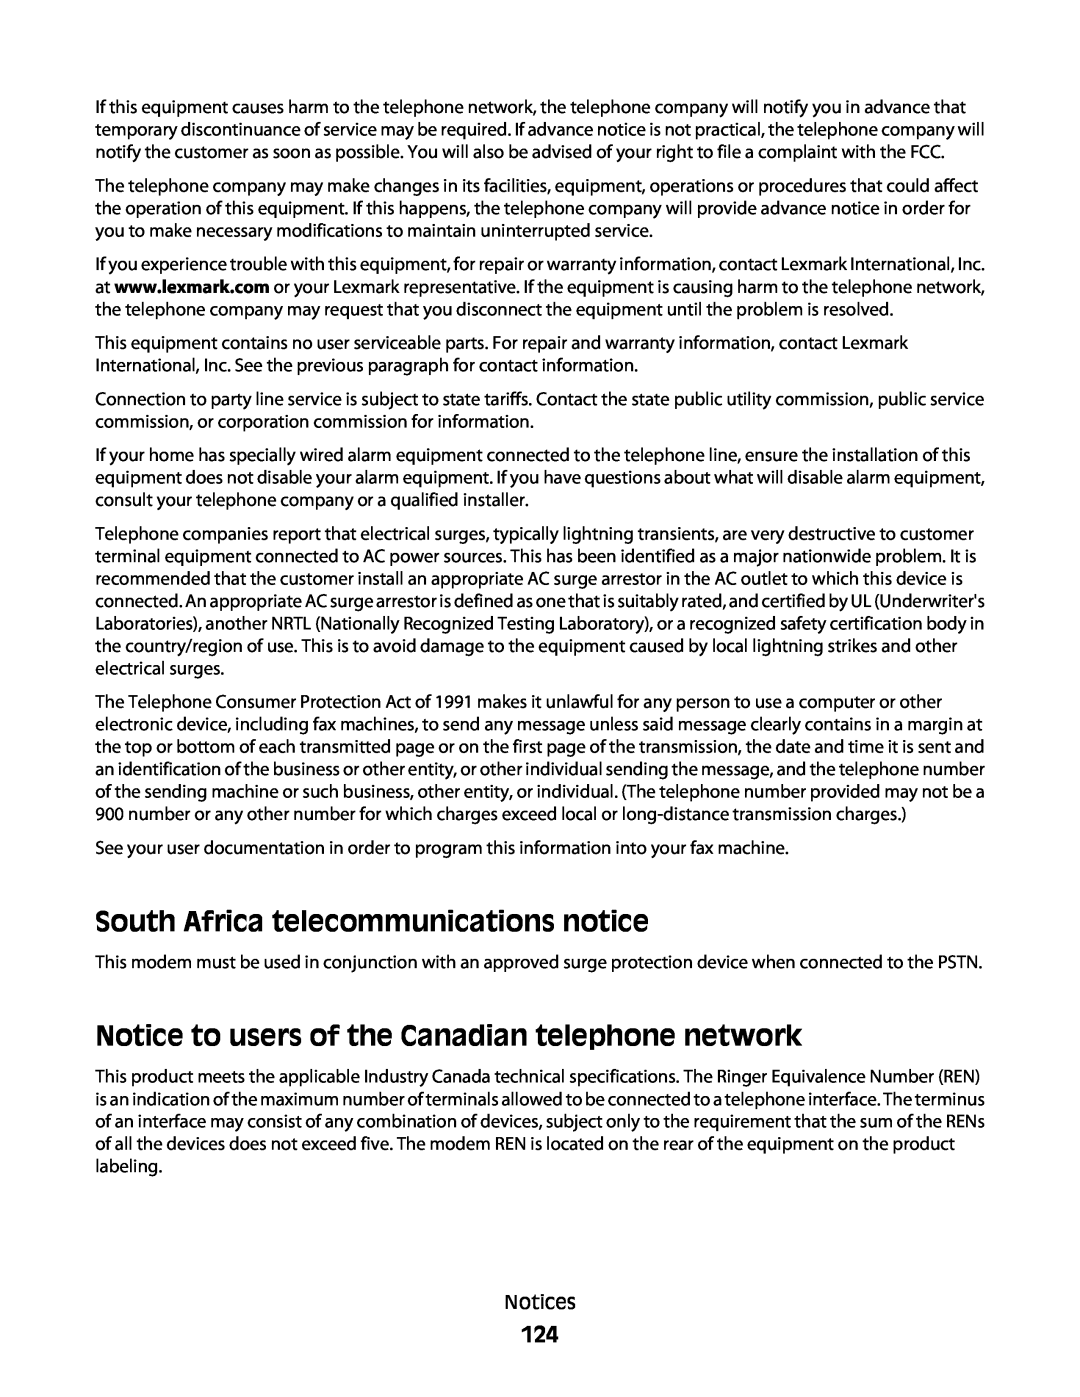 Lexmark 101, 10E manual South Africa telecommunications notice, Notice to users of the Canadian telephone network 